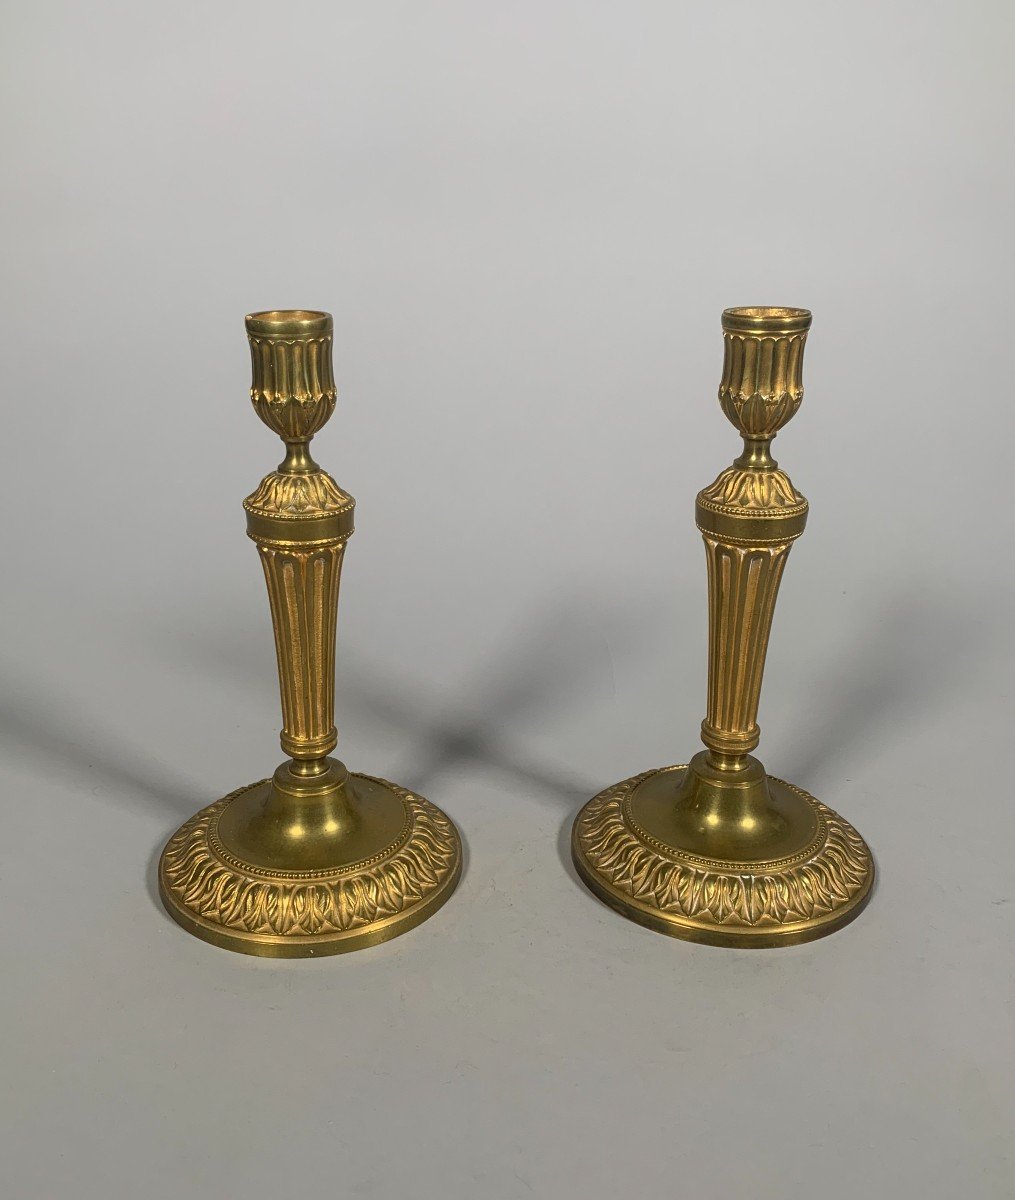 Louis XVI Period Candlesticks In Chiseled And Gilded Bronze.